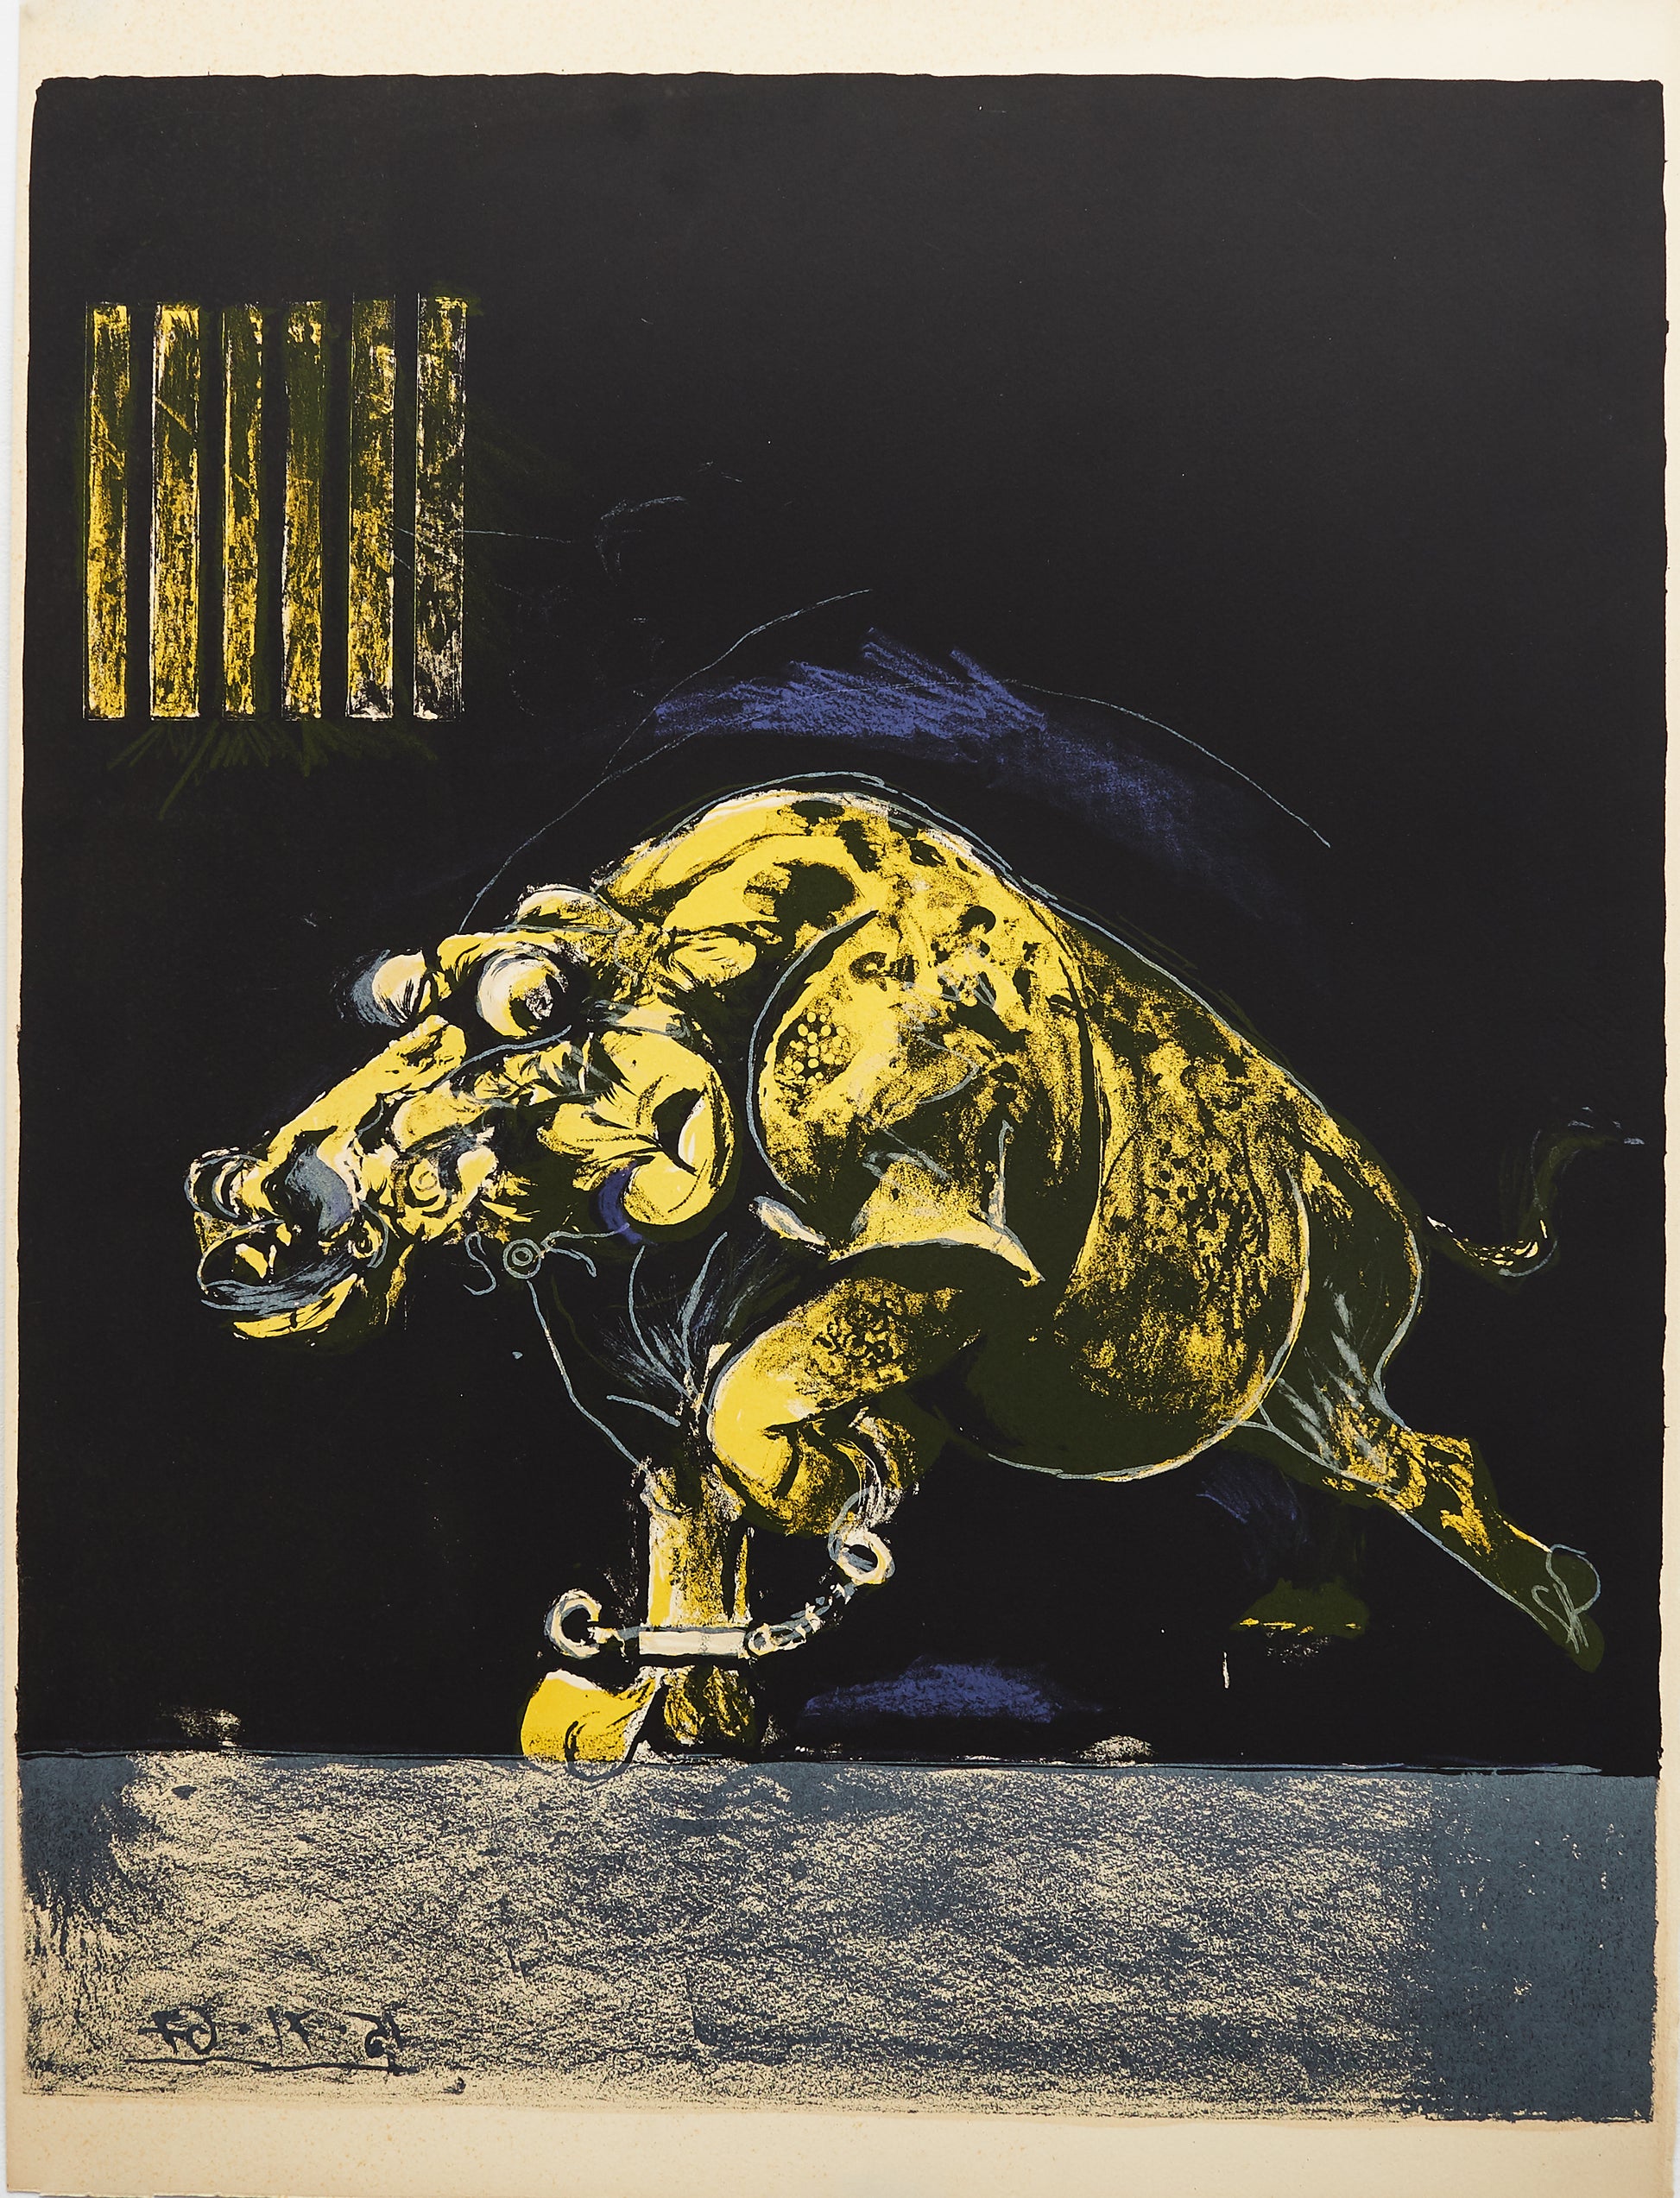 Chained Beast by Graham Sutherland - Mourlot Editions - Fine_Art - Poster - Lithograph - Wall Art - Vintage - Prints - Original